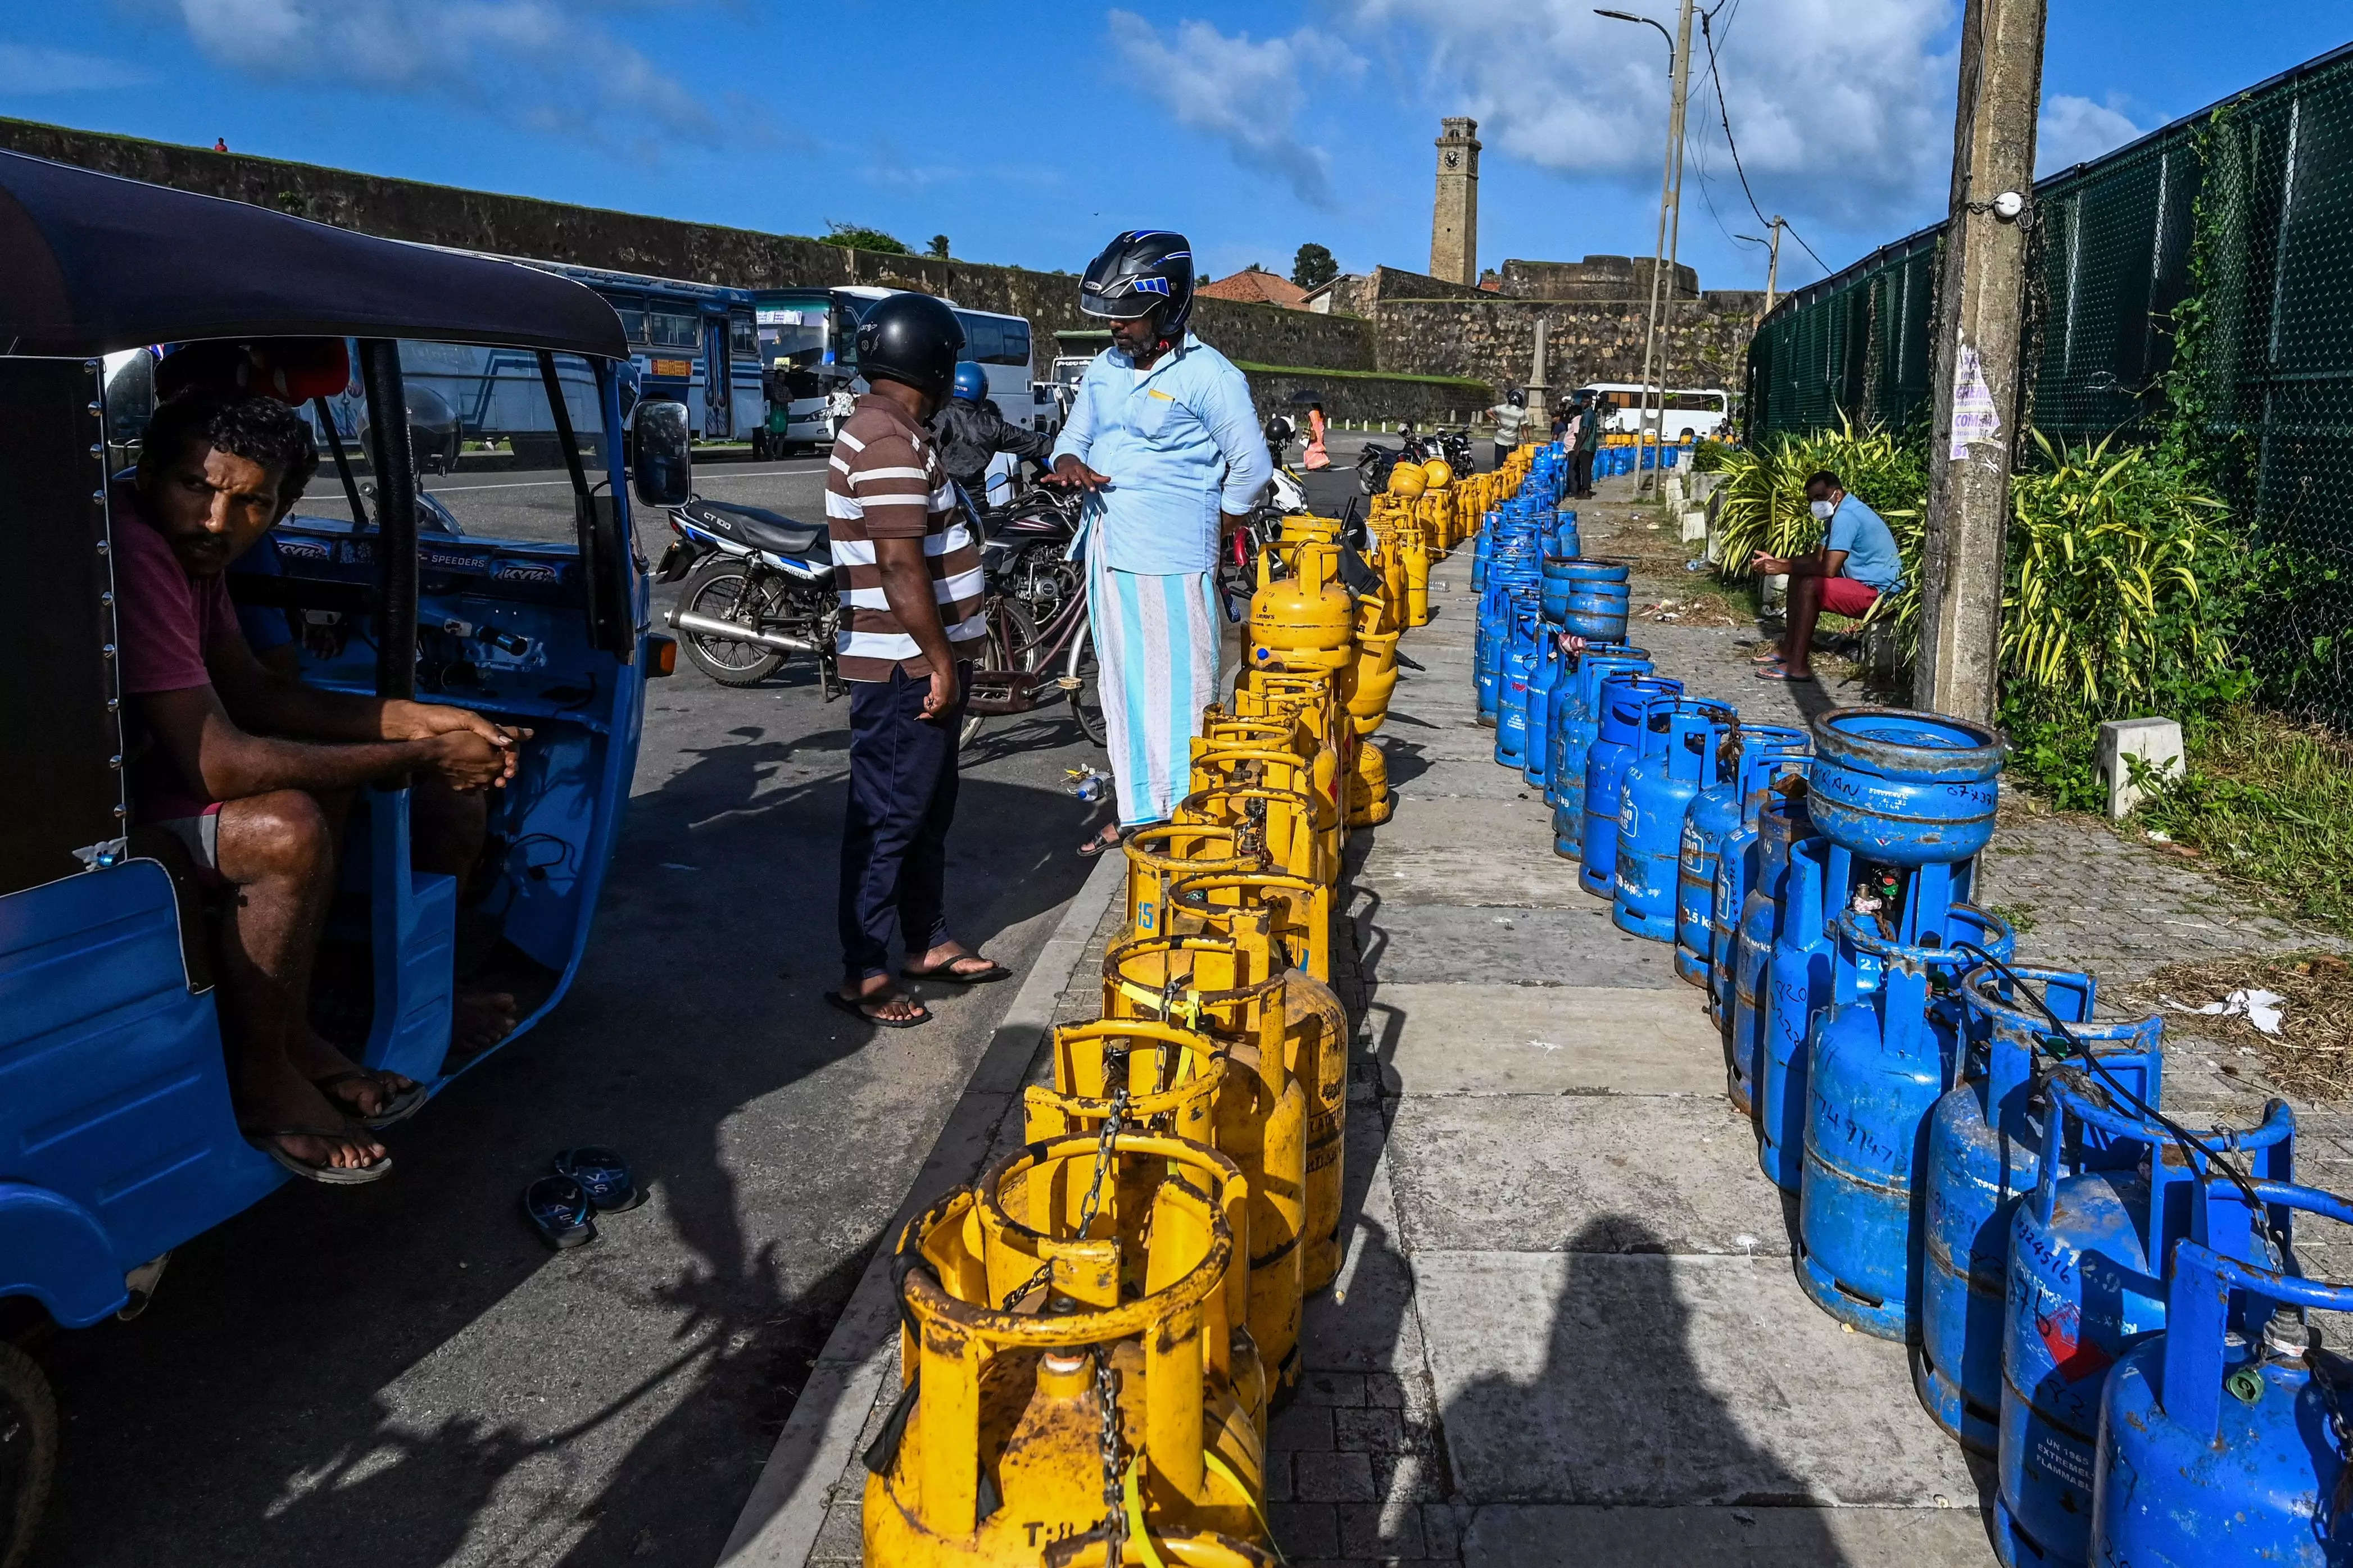 People to buy Liquefied Petroleum Gas (LPG) cylinders near the Galle International Cricket Stadium in Galle on June 28, 2022.